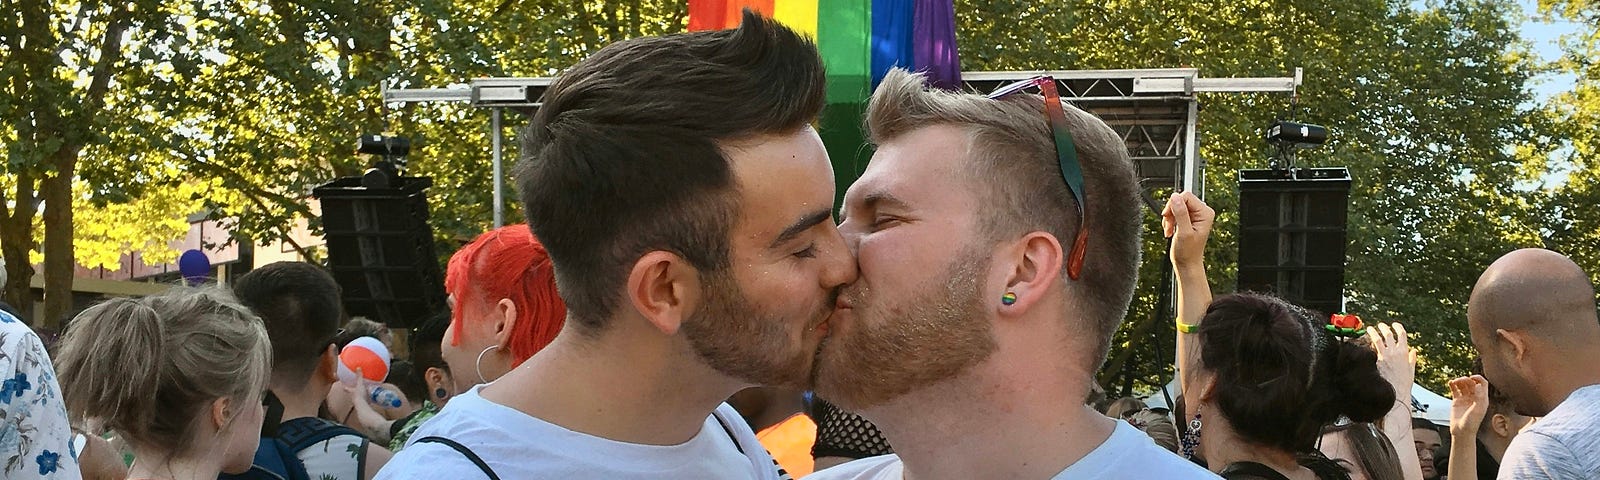 gay couple at pride kissing. Their t-shirts say “I am made in the image of God”